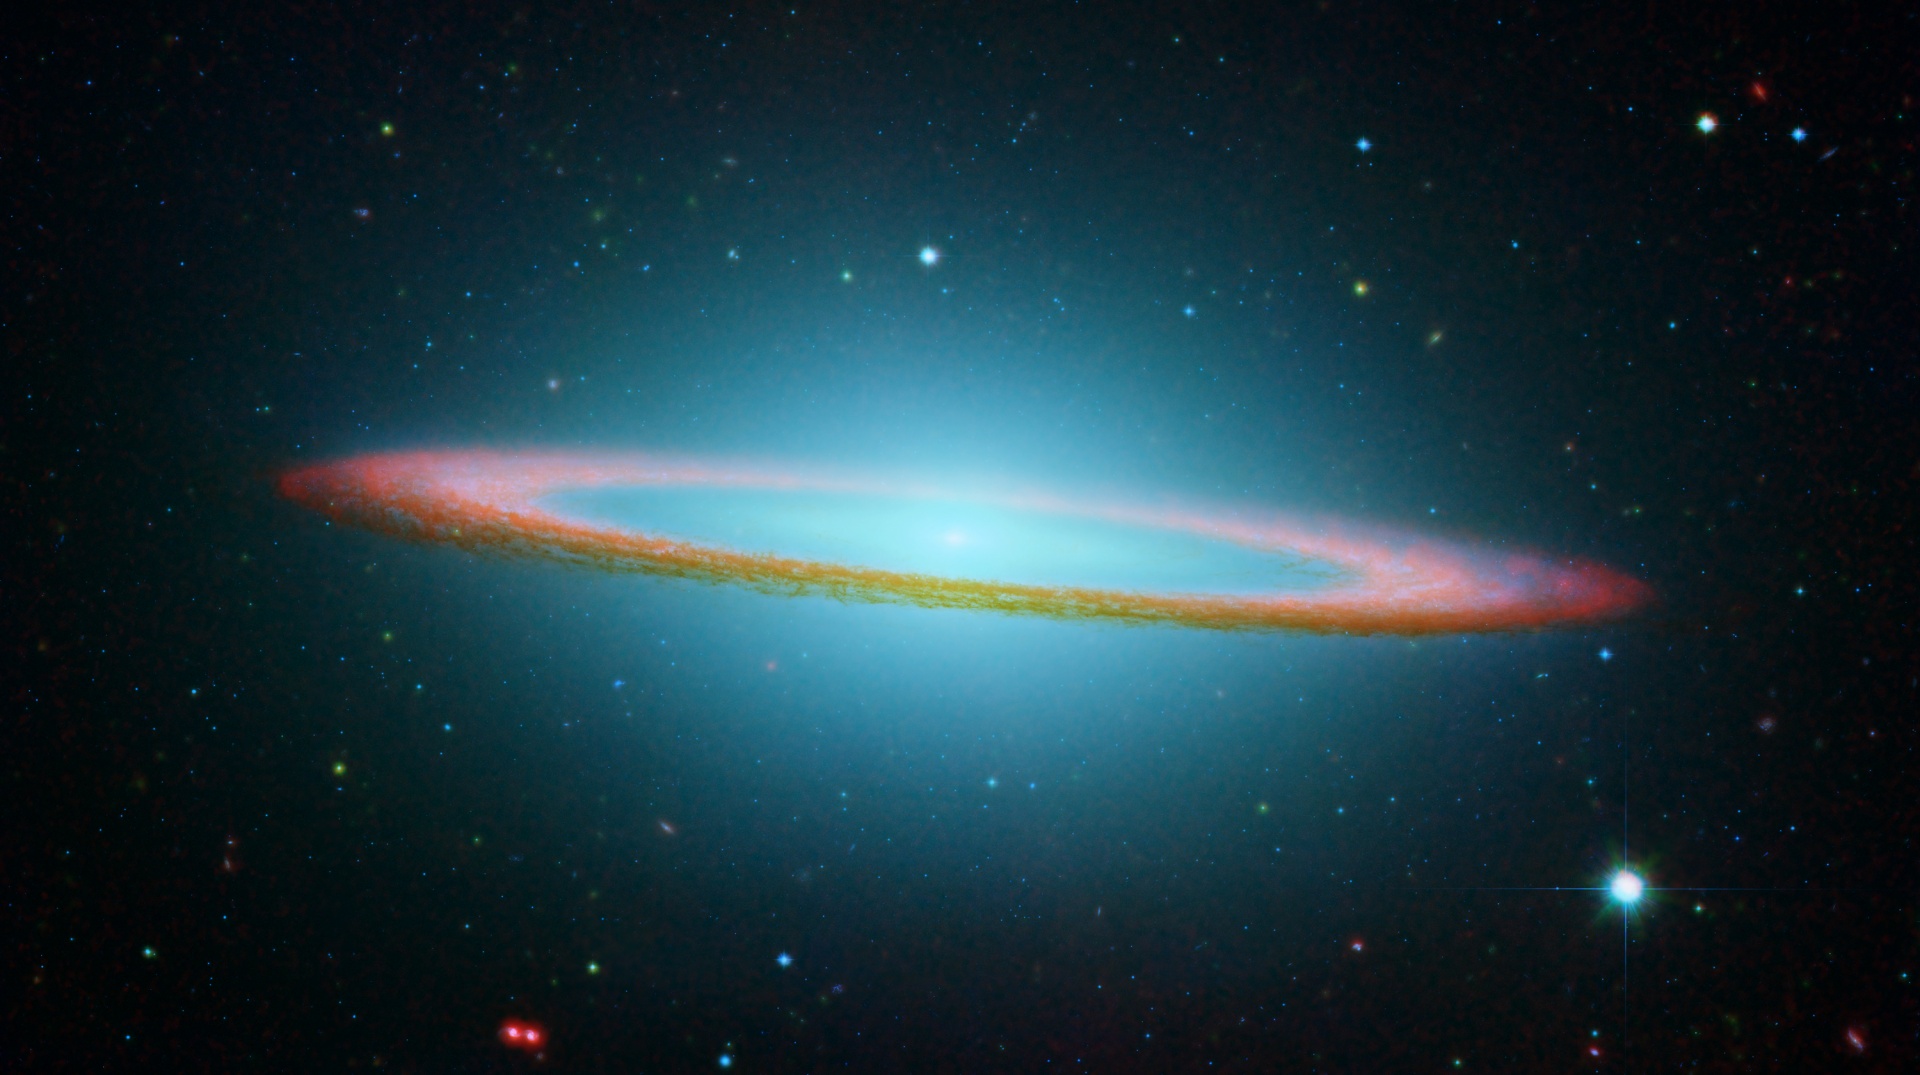 A photo taken by the Hubble Telescope that looks like a sombrero